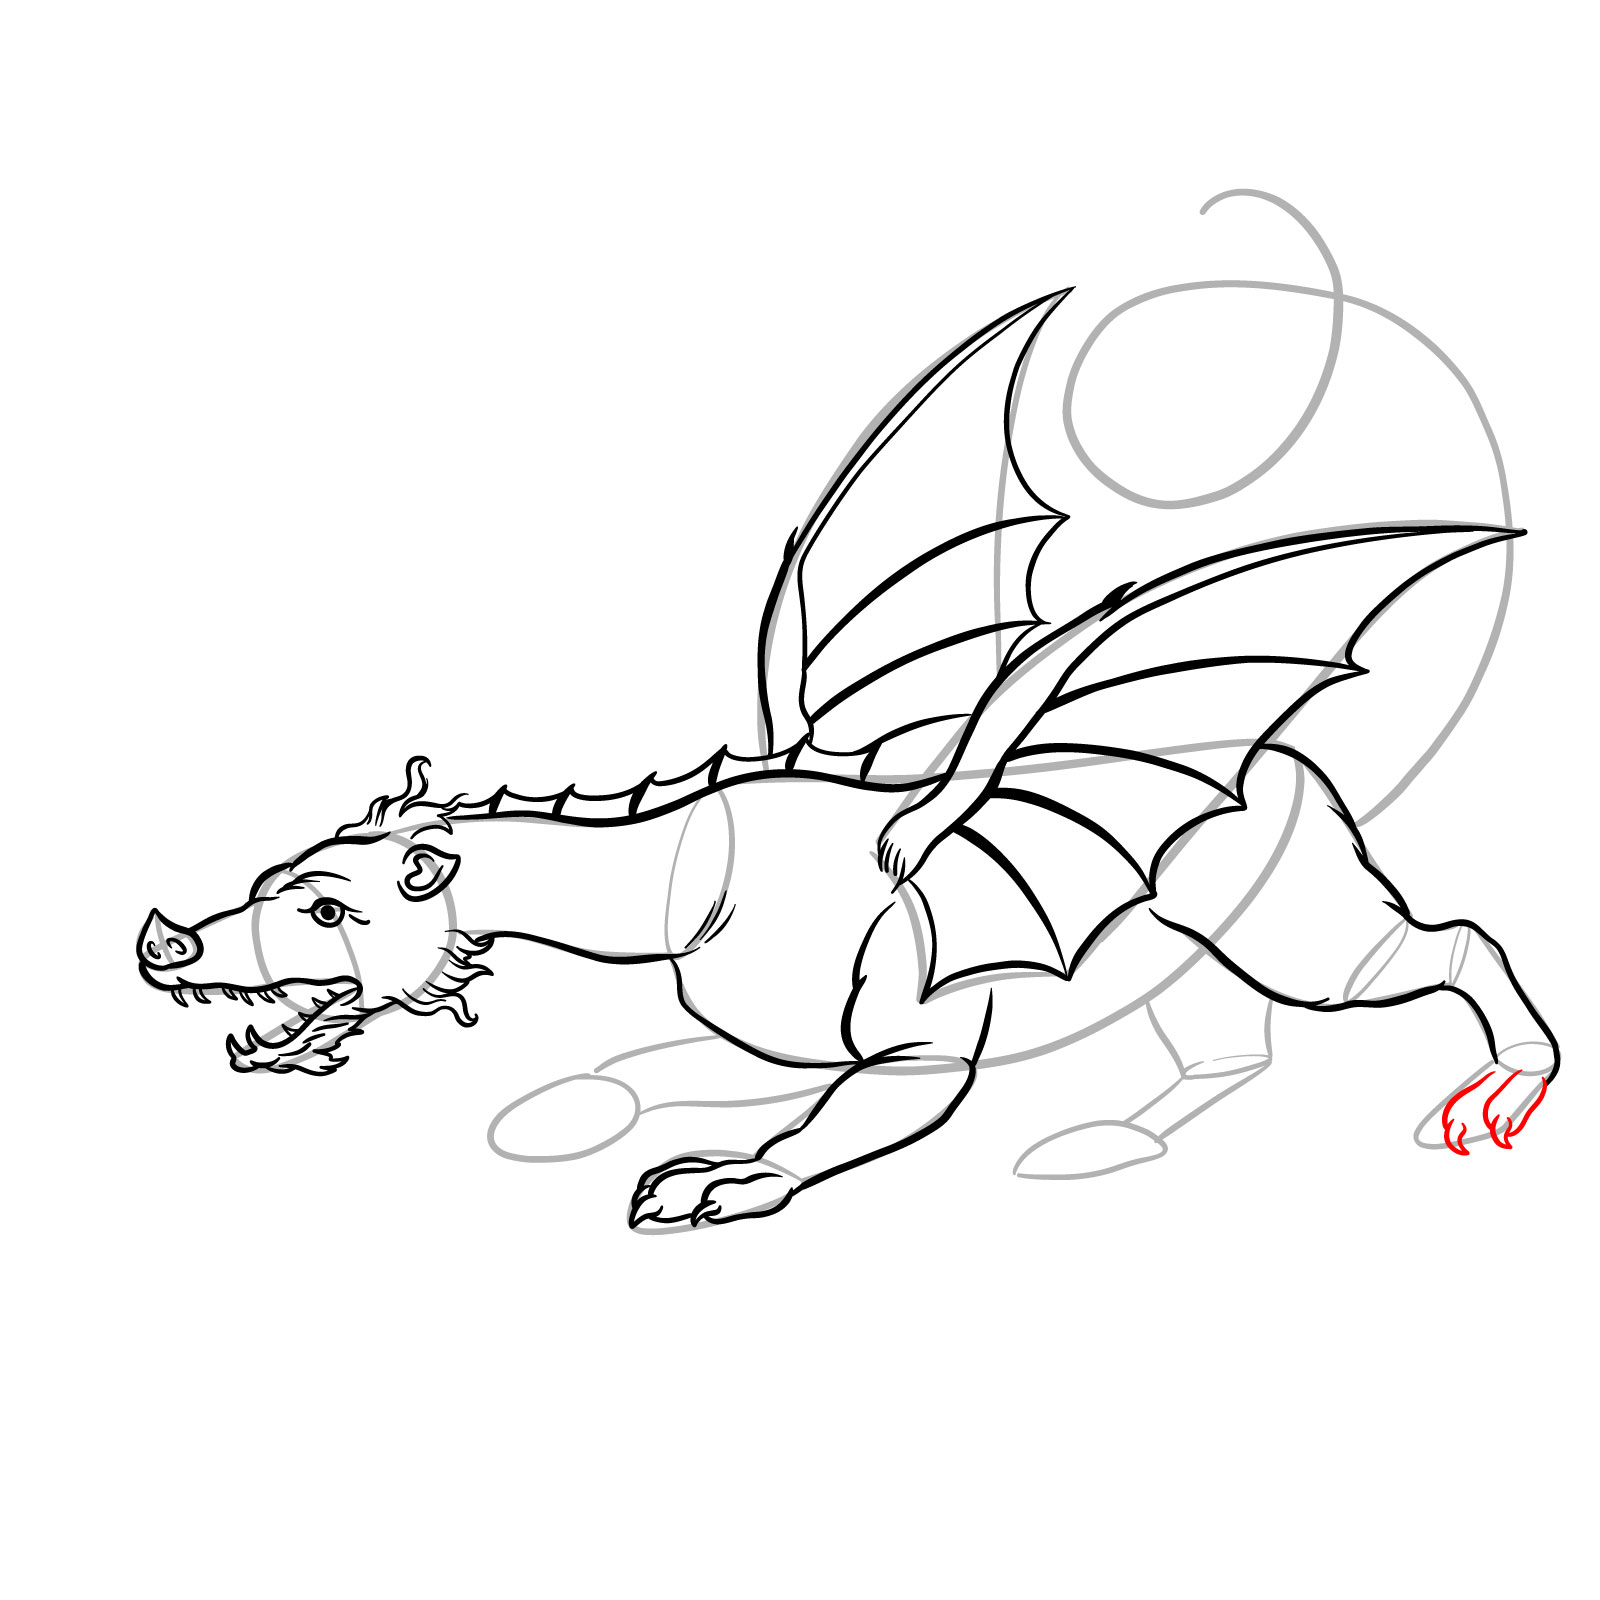 How to draw a classic European dragon - step 31